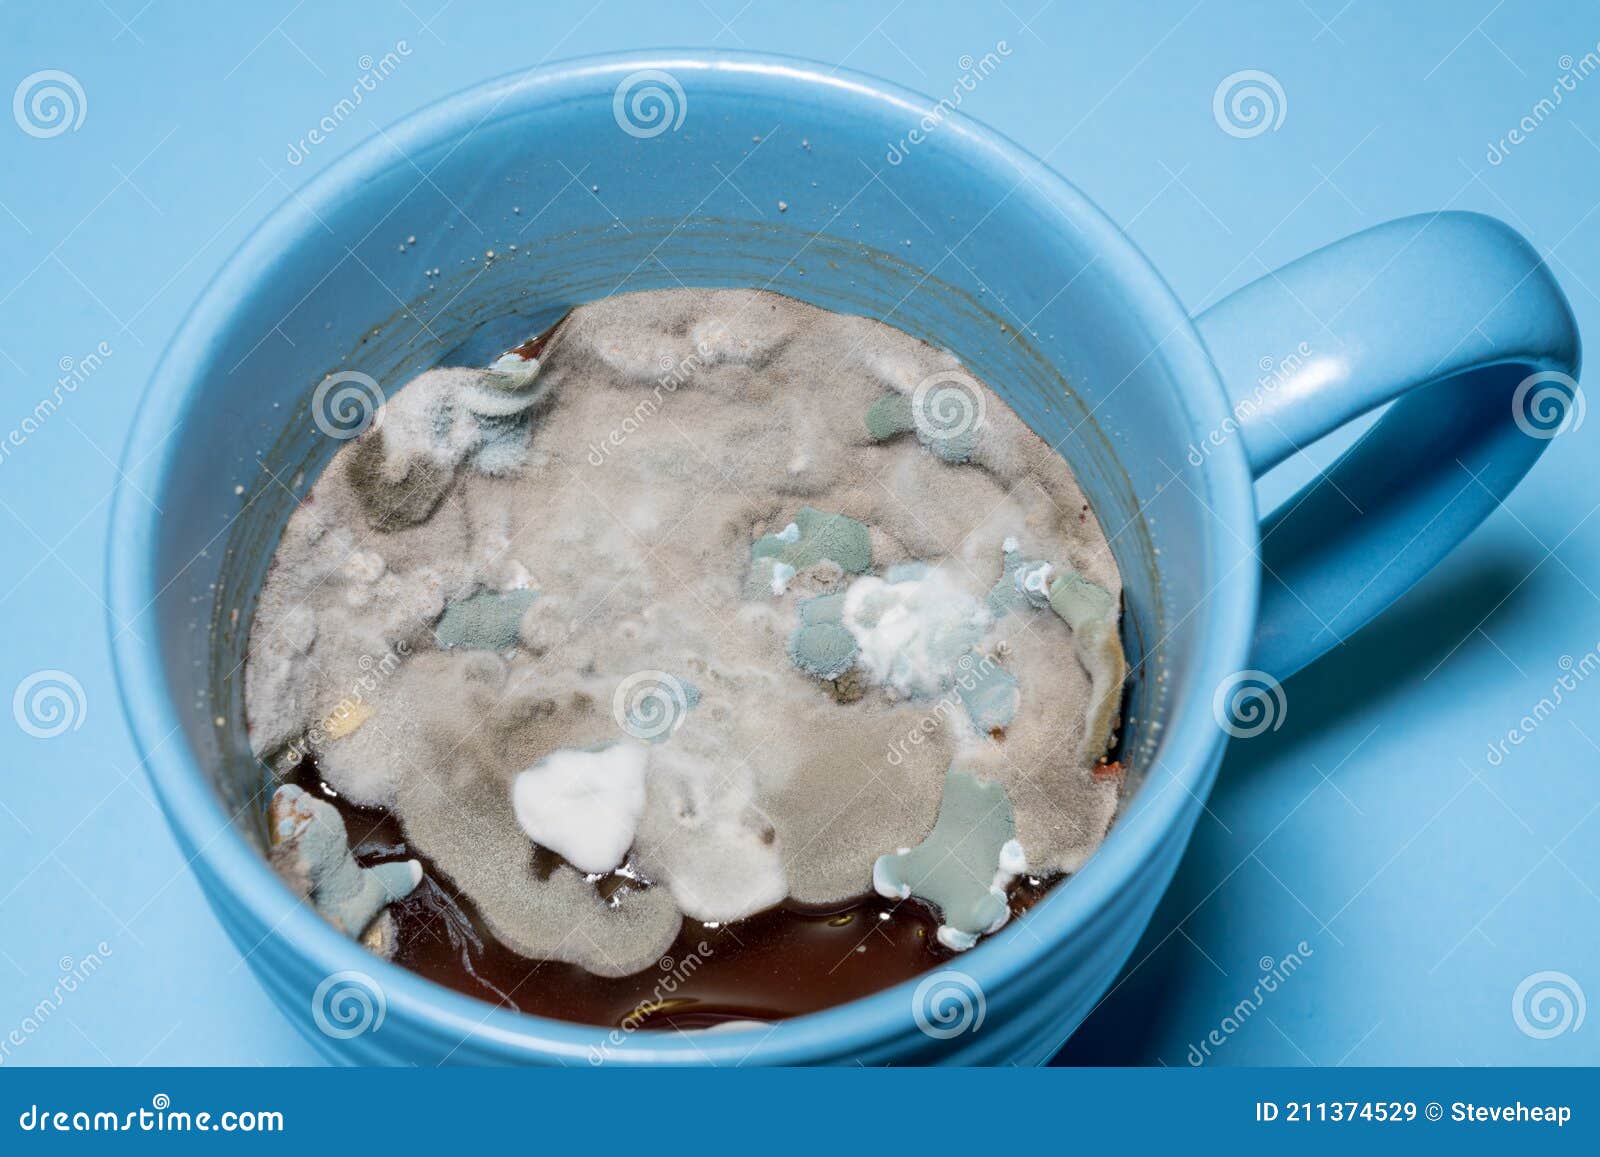 Gravy Growing Many Types of Mould and Fungus Inside Blue Coffee Mug Stock  Image - Image of contaminated, biological: 211374529